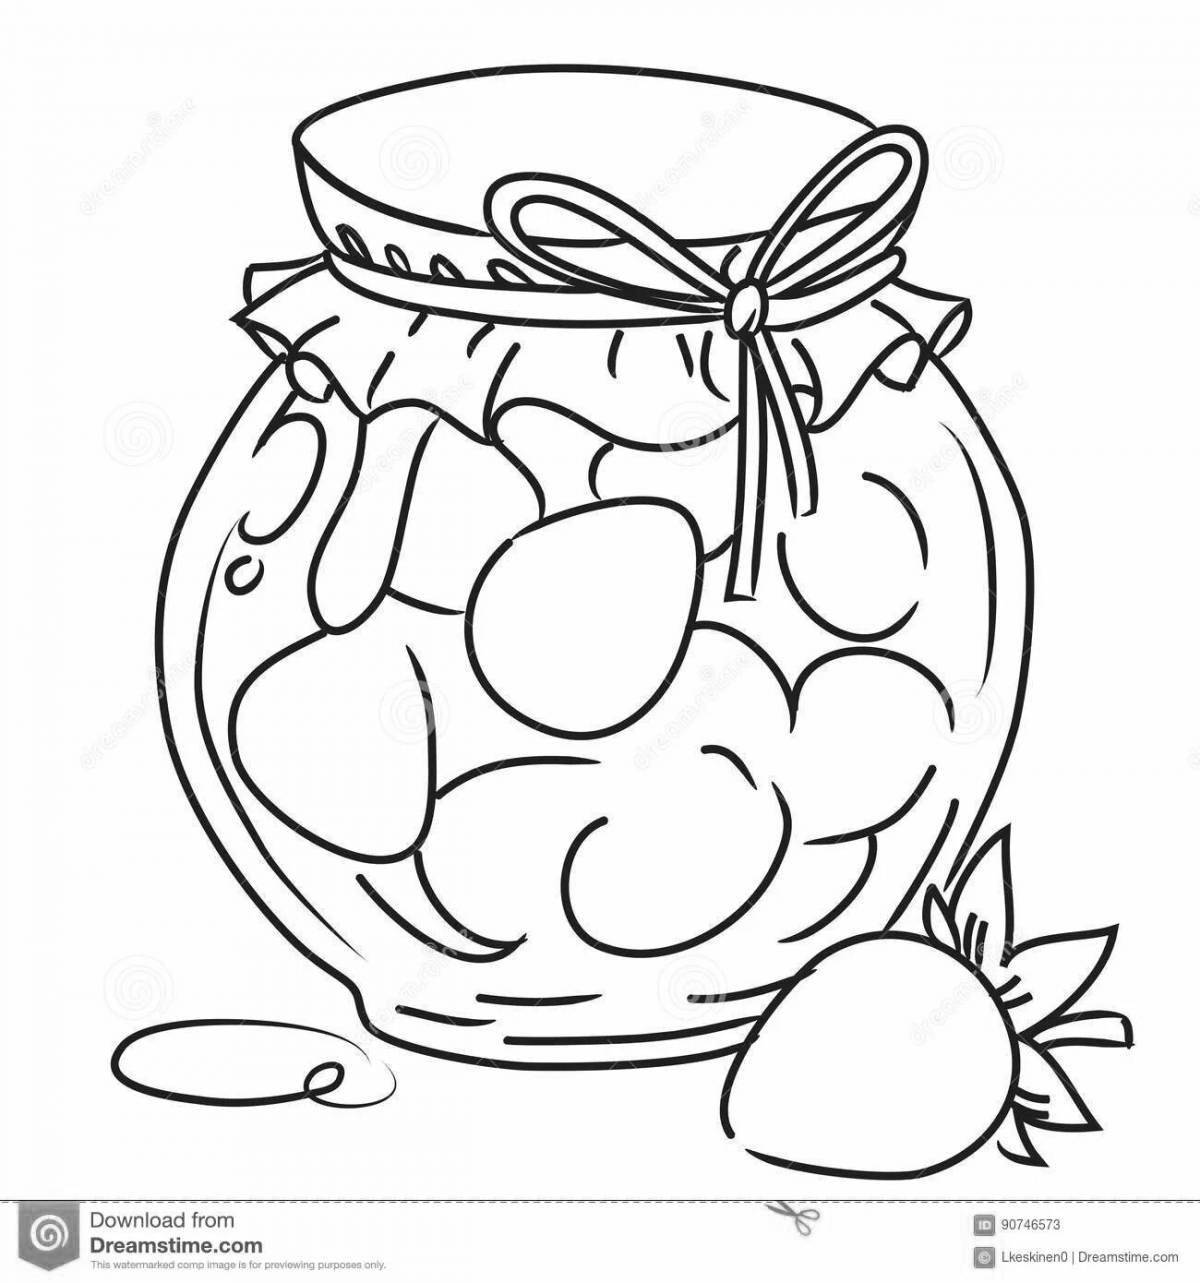 Colorful jam coloring pages for kids